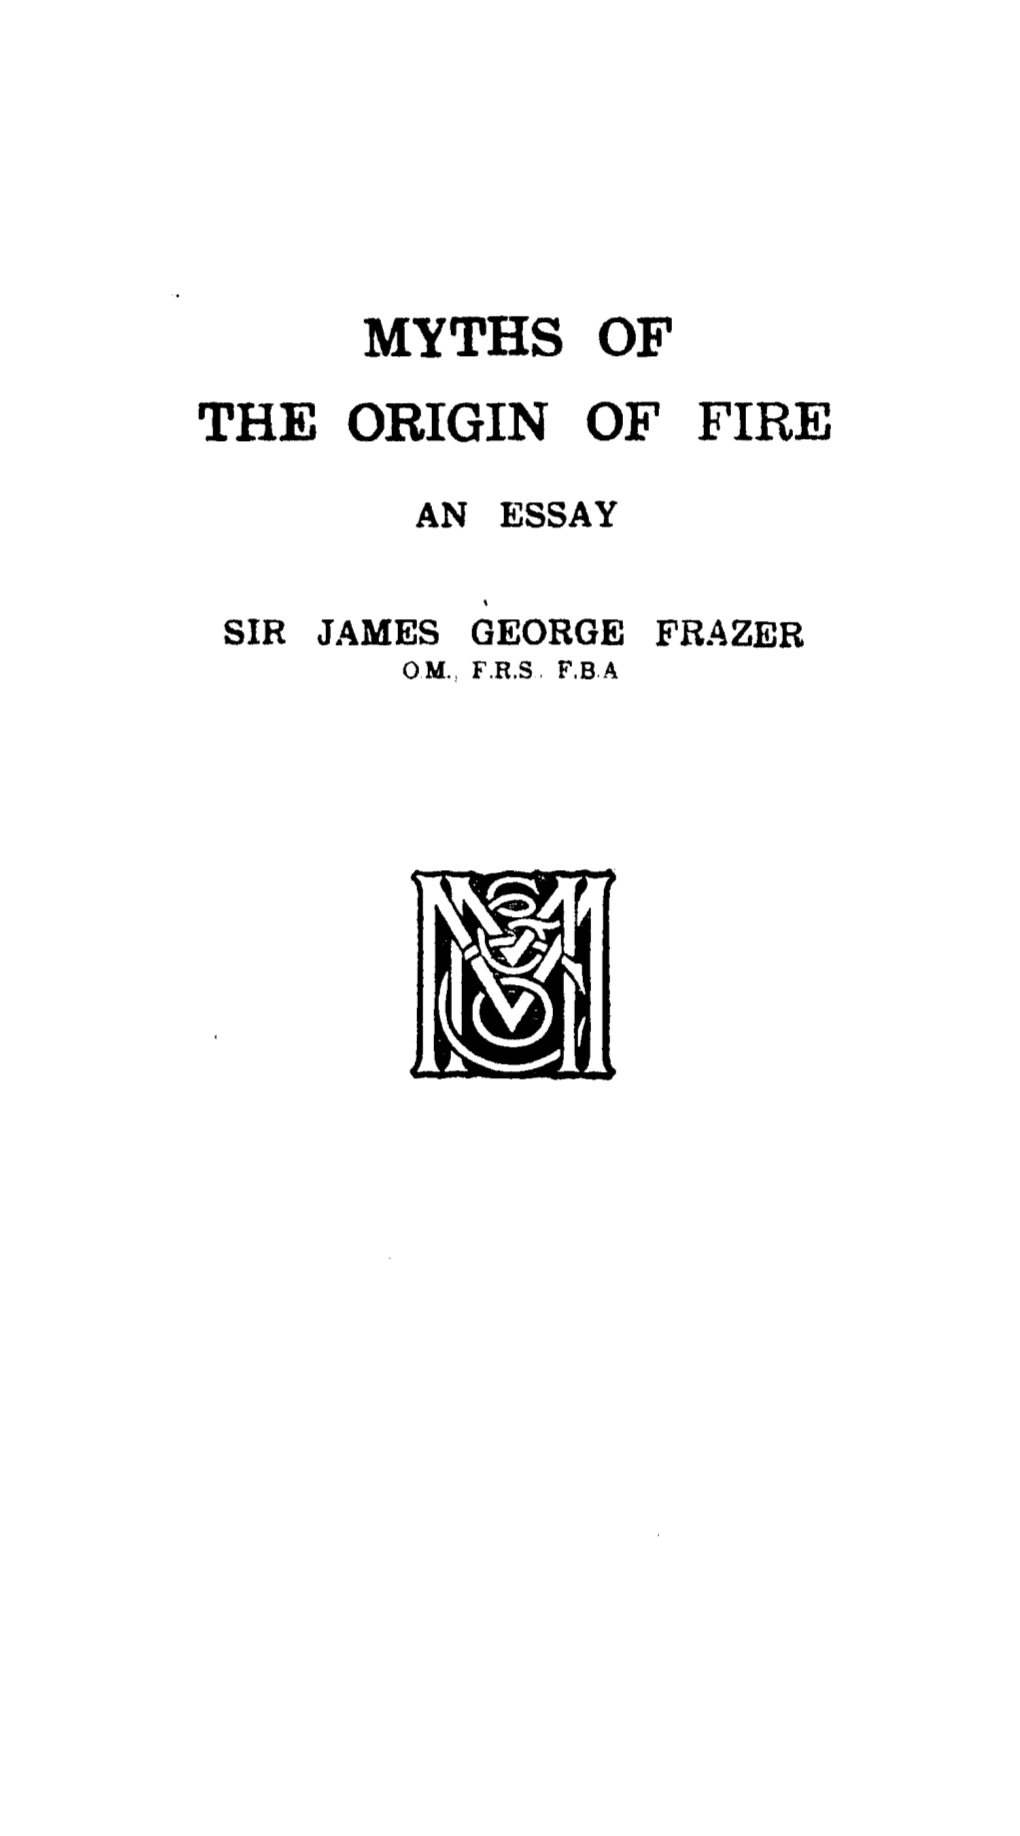 Myths of the Origin of Fire